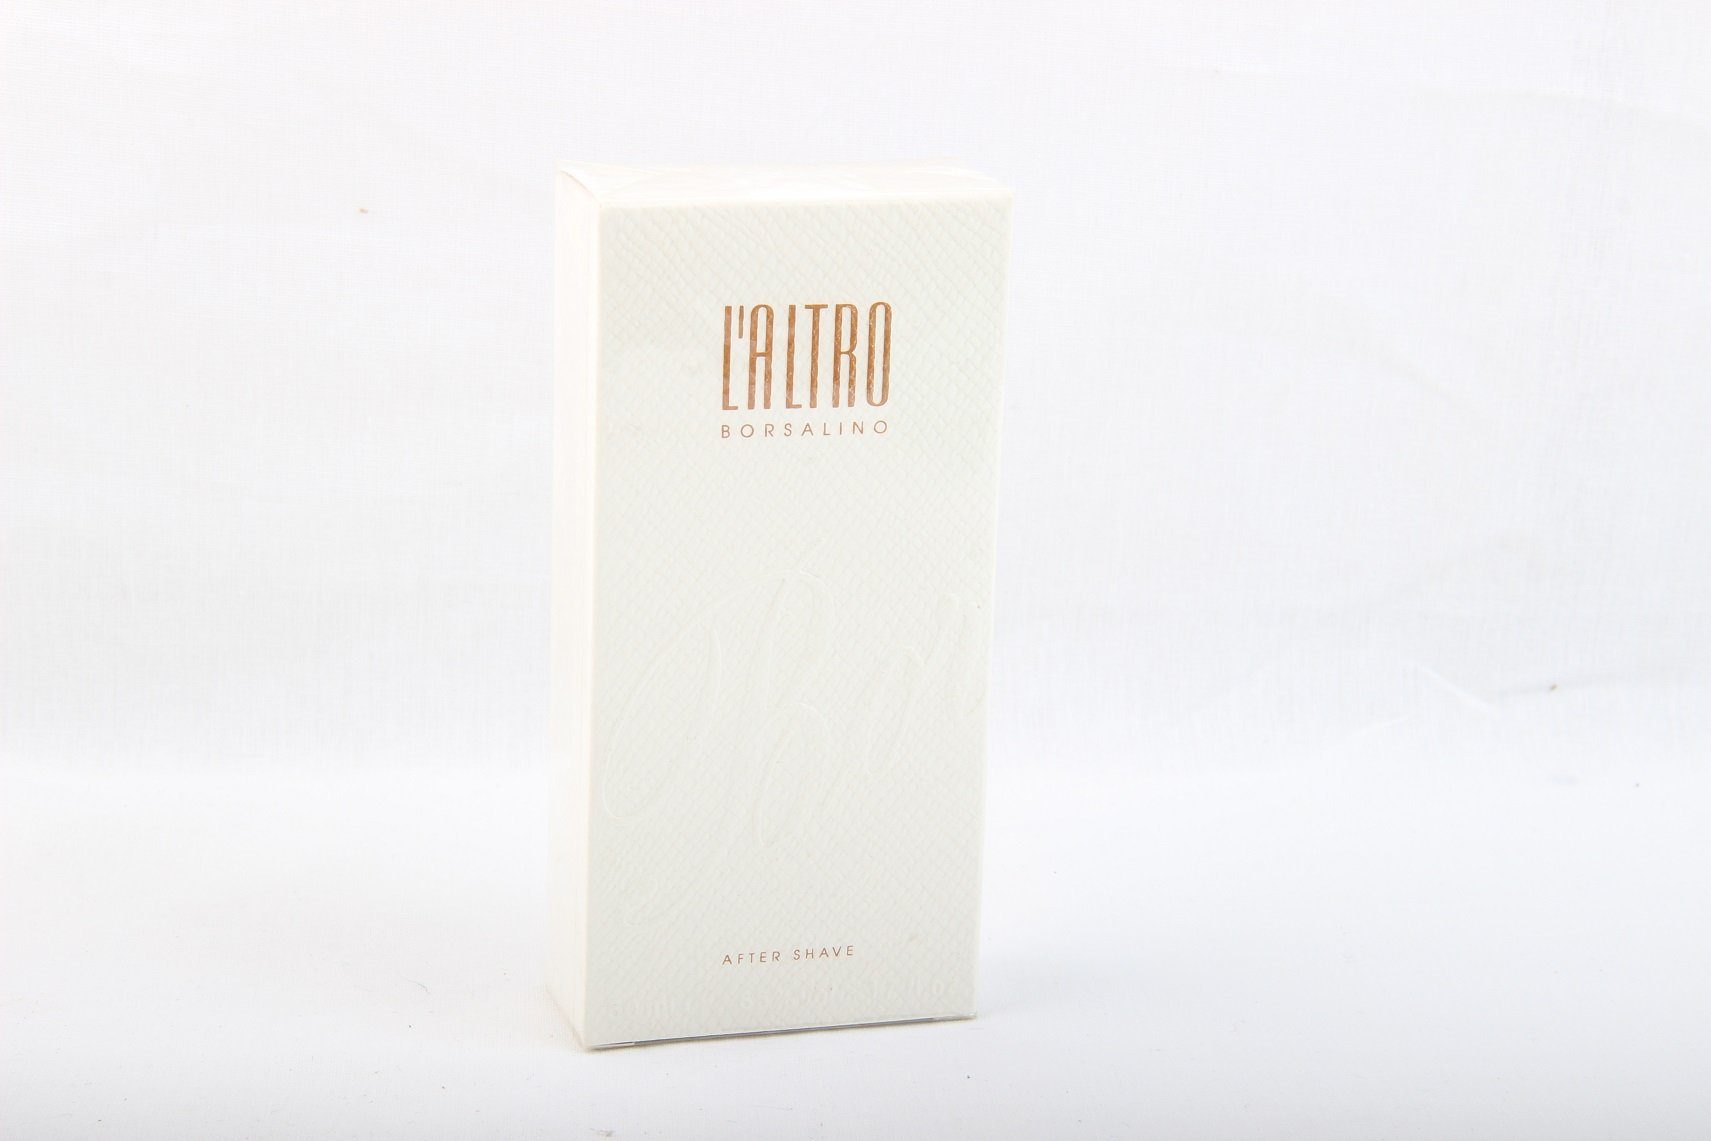 Borsalino After-Shave Borsalino L'Altro After Shave 50ml